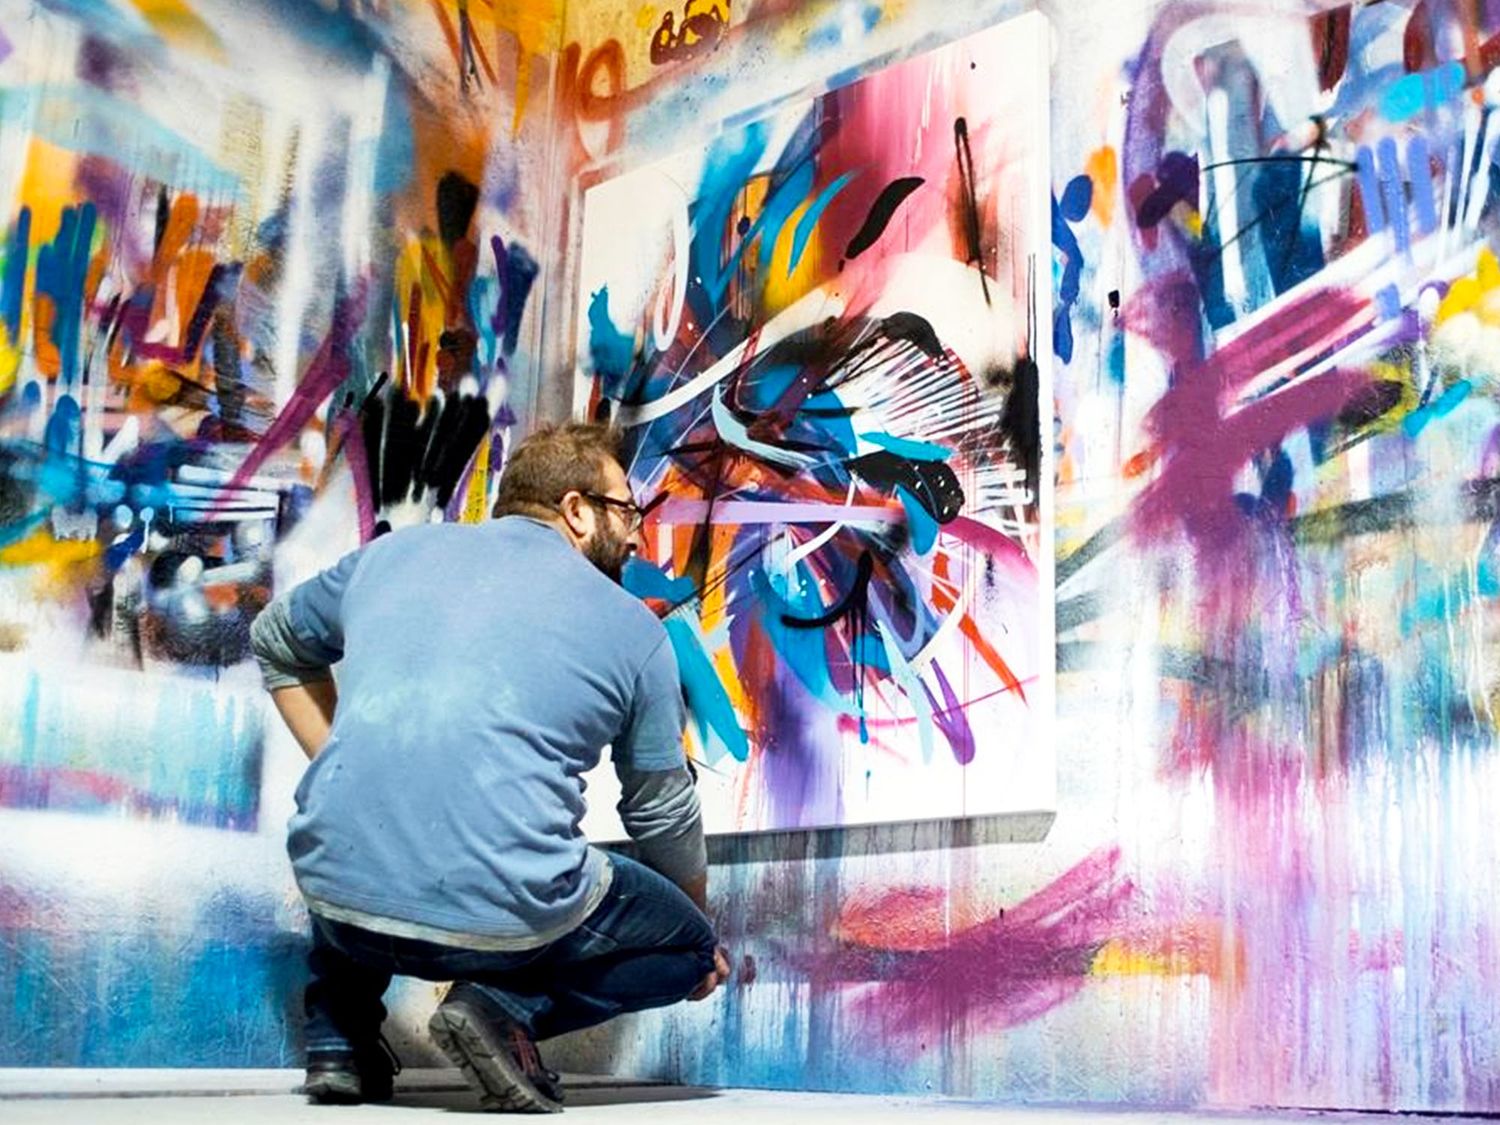 The art of Emanuele is like a mix between graffiti and abstract expressionism. A personal trait hovering between figurative and action painting that leaves no one indifferent (©Giuseppe Torre).